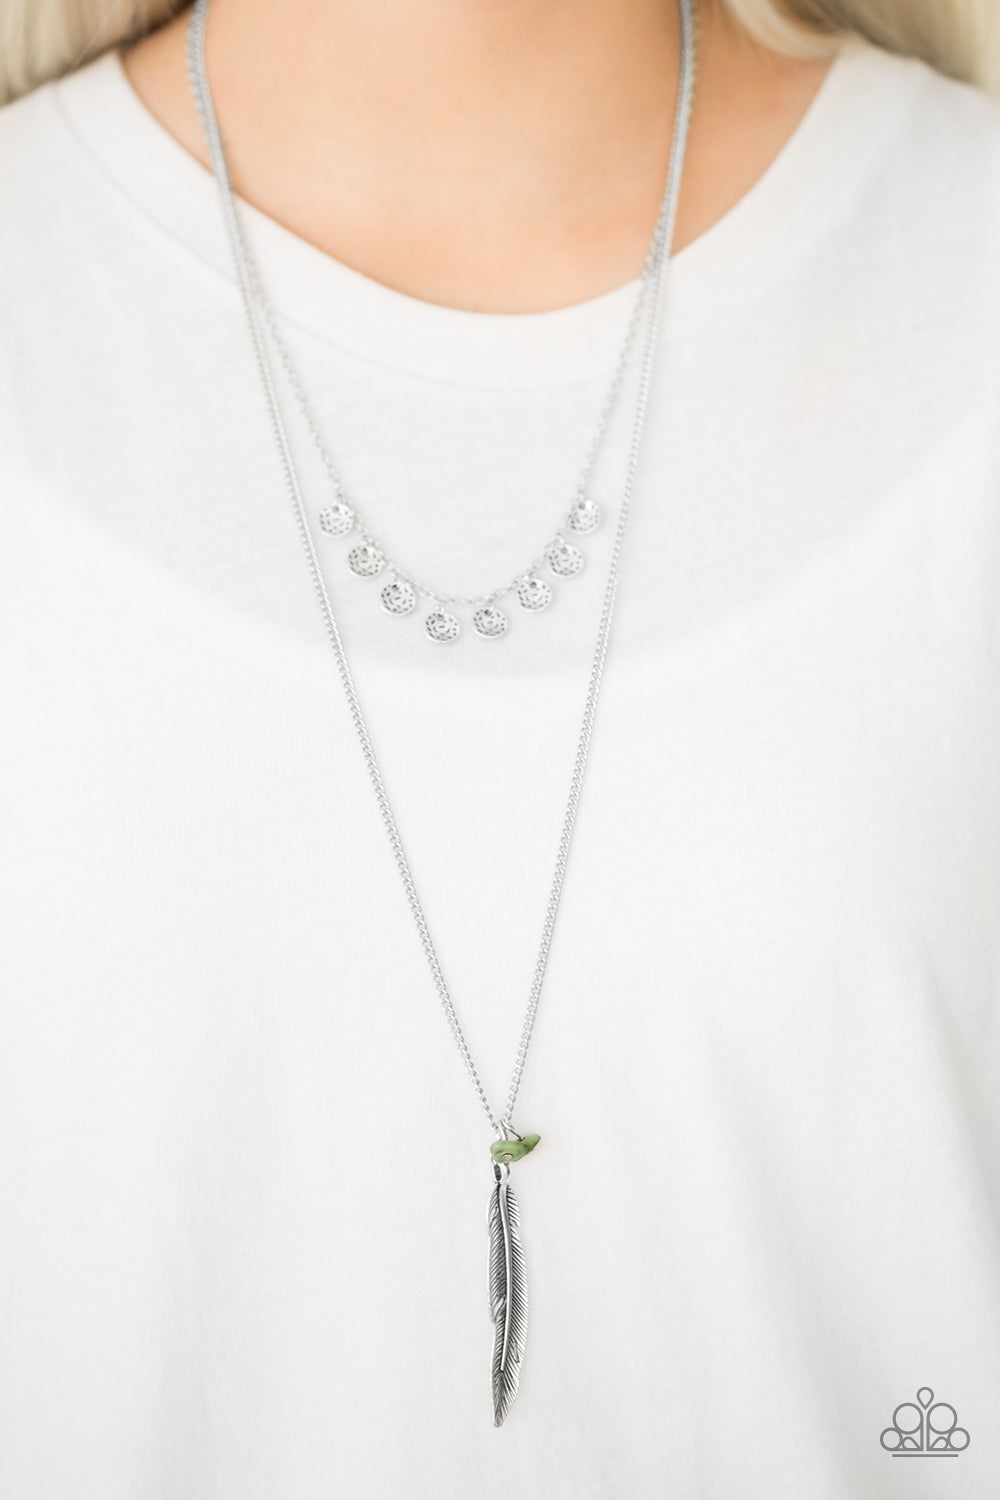 Mojave Musical - Green necklace